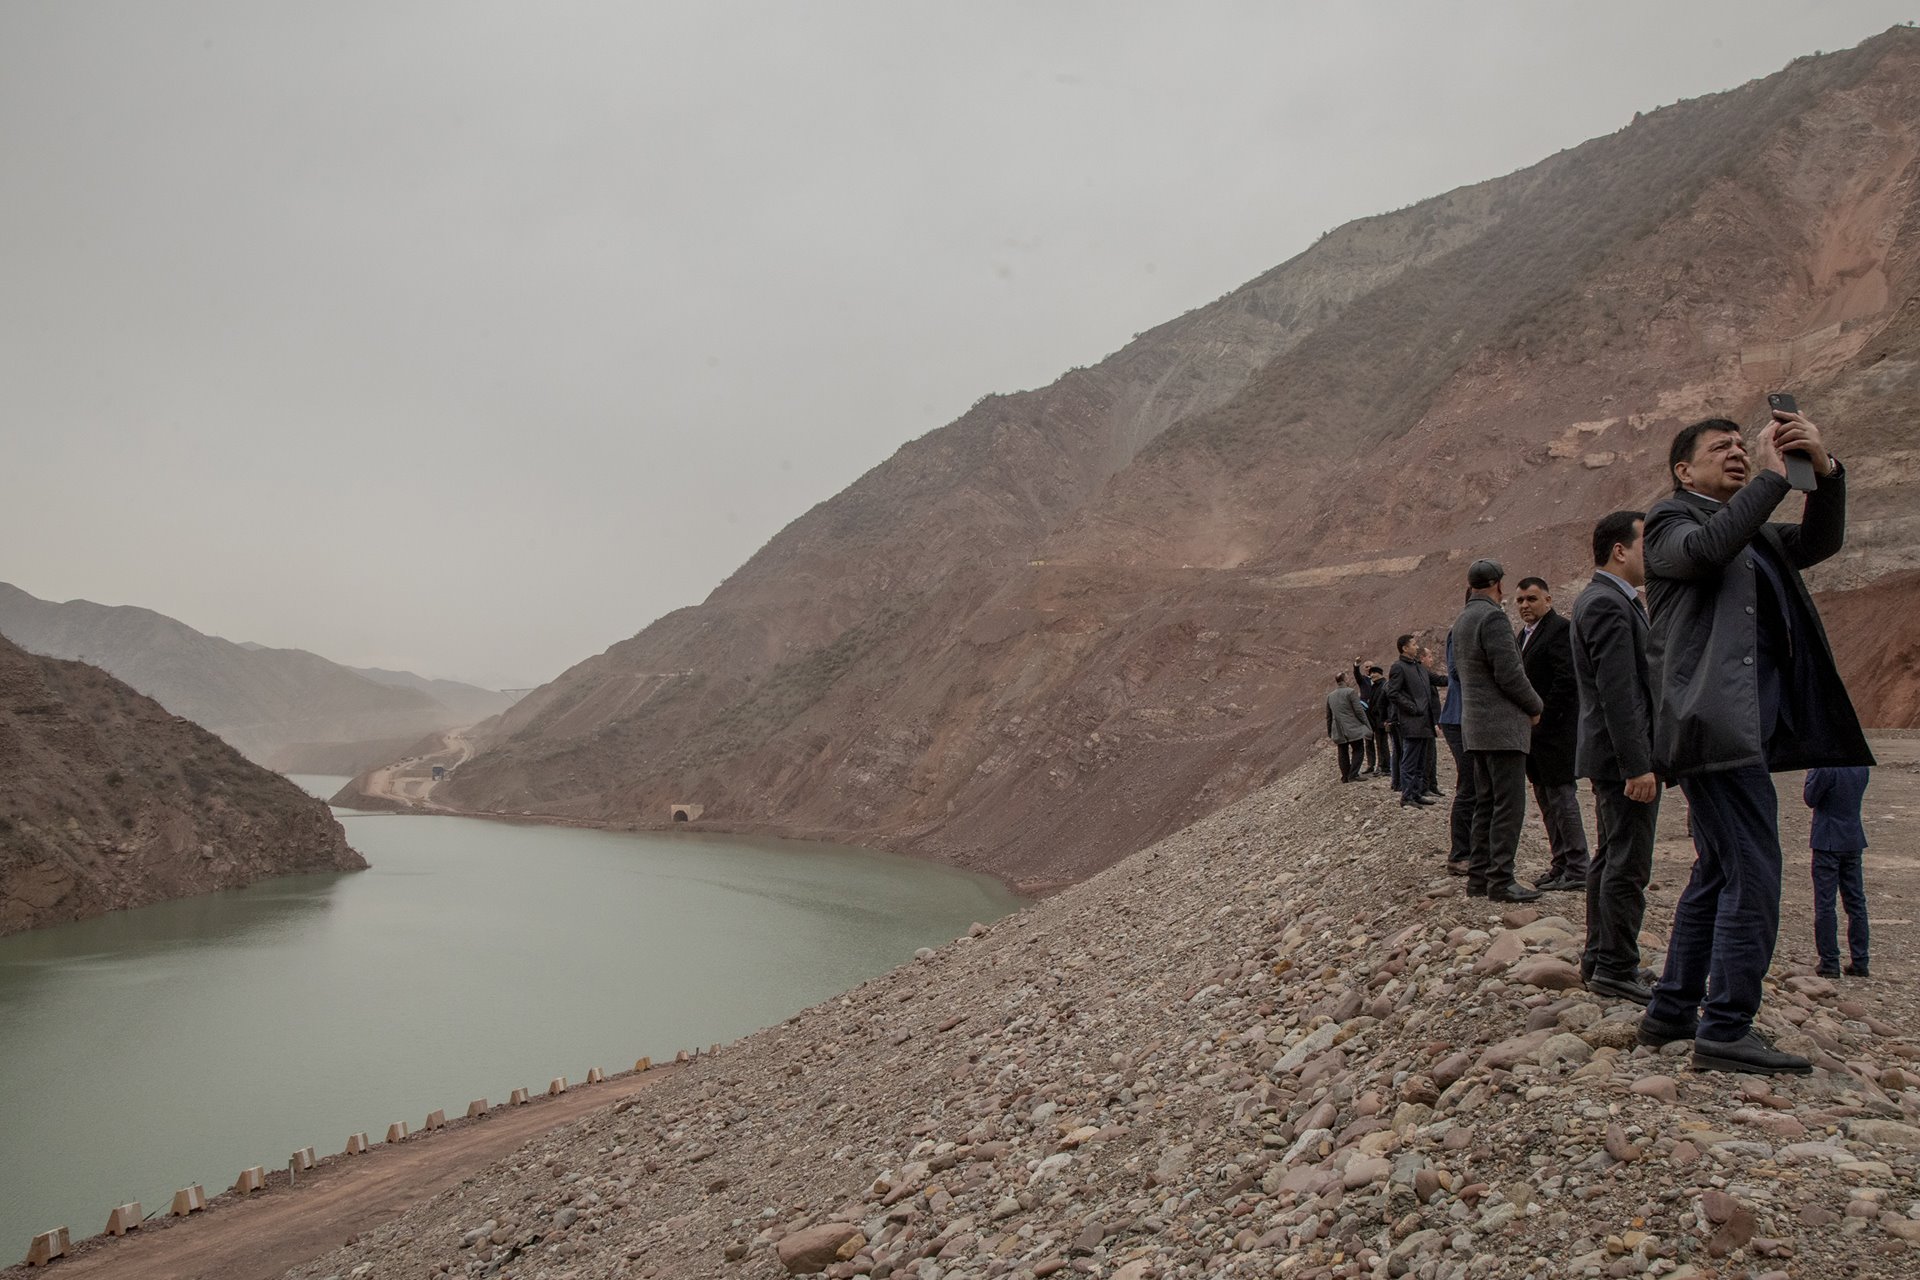 <p>Visitors photograph the Rogun Dam, being built in eastern Tajikistan to provide hydroelectric power. The 335-meter-high dam is due for completion in 2028-2029.</p>
